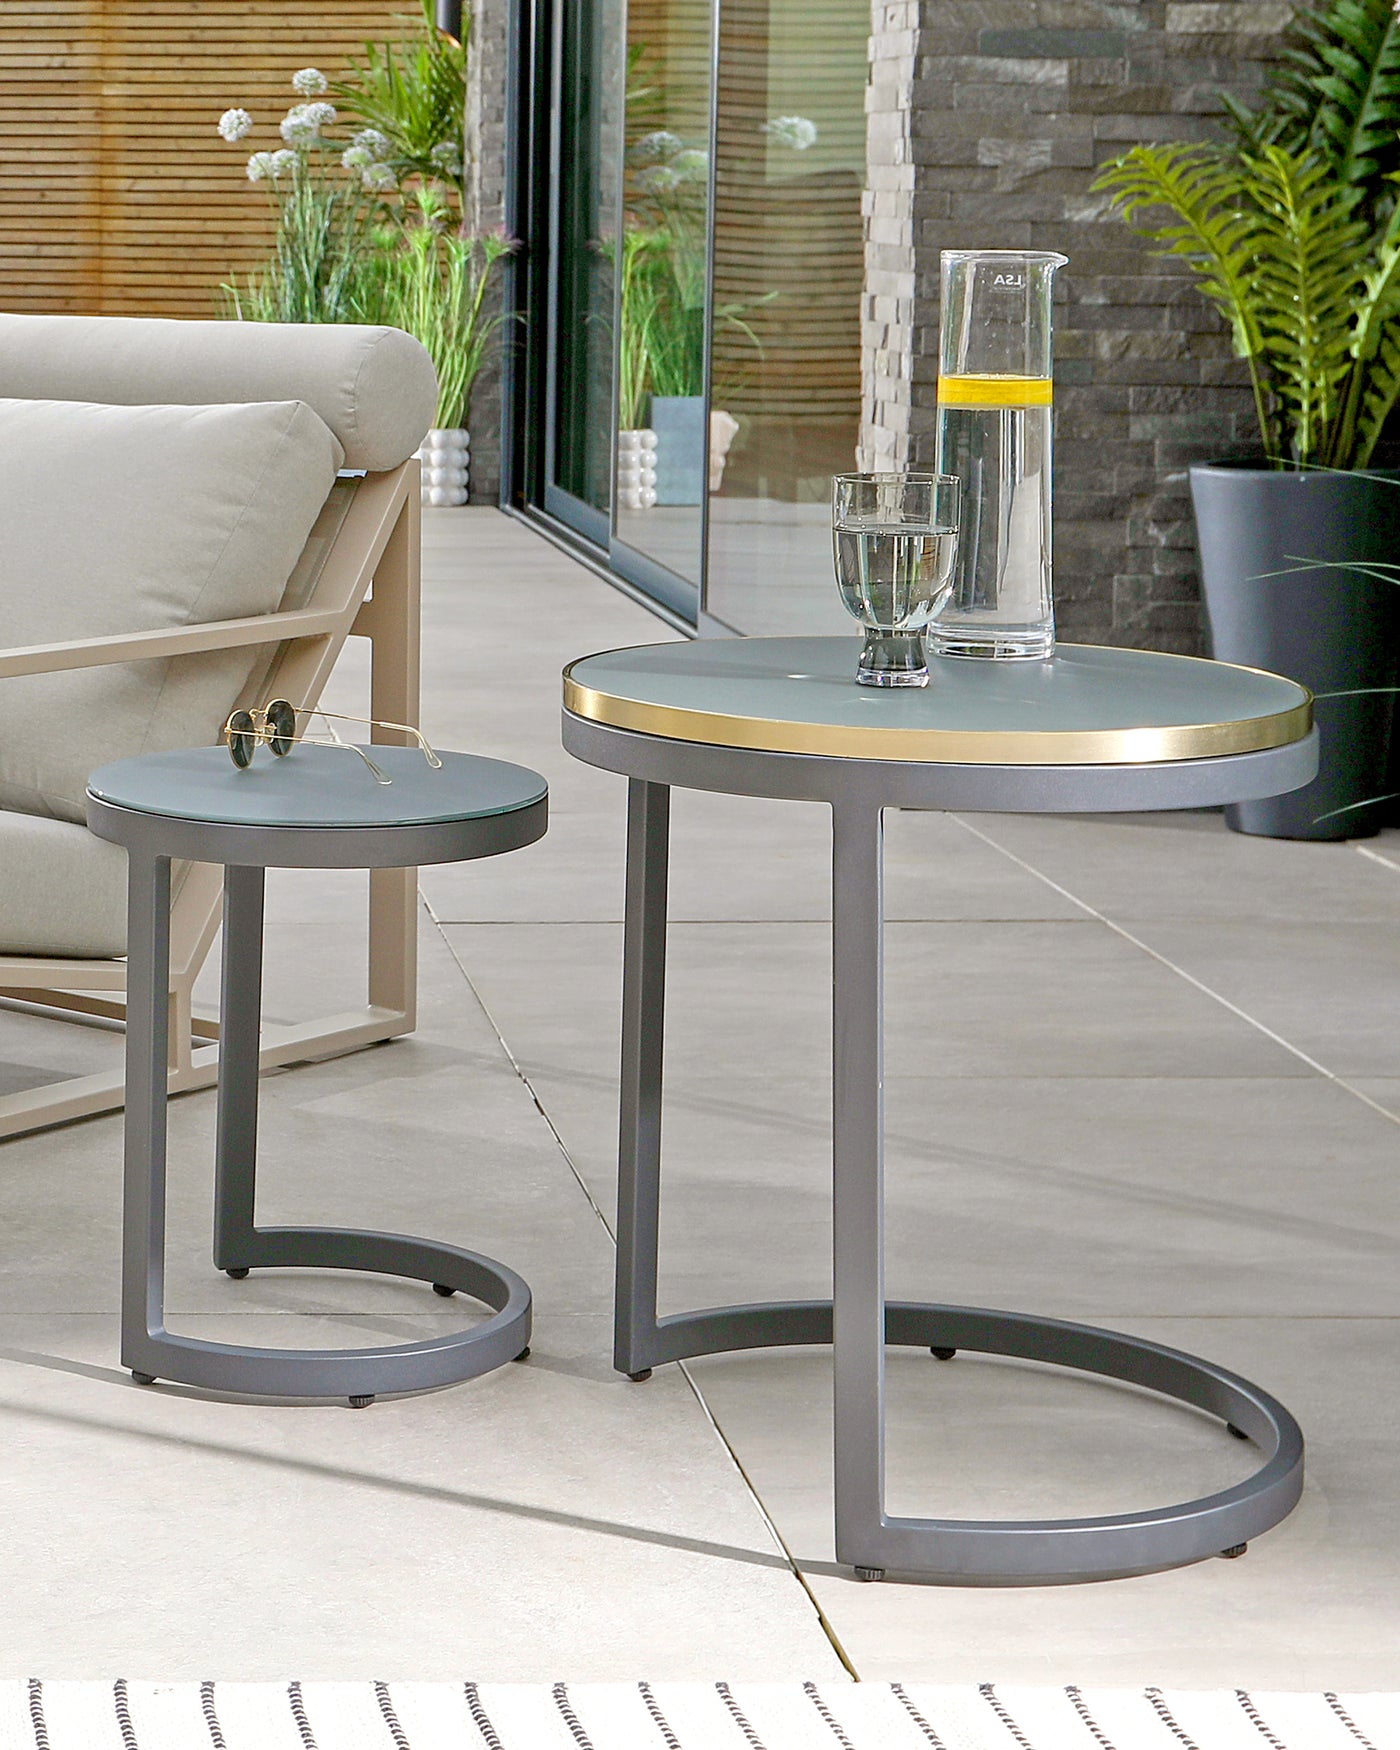 Two modern round side tables with sleek metal frames and a matte finish. The smaller table features a dark grey top, while the larger one has a taupe top with a metallic gold rim. Both have a distinctive C-shaped base that allows for easy integration with various seating arrangements.